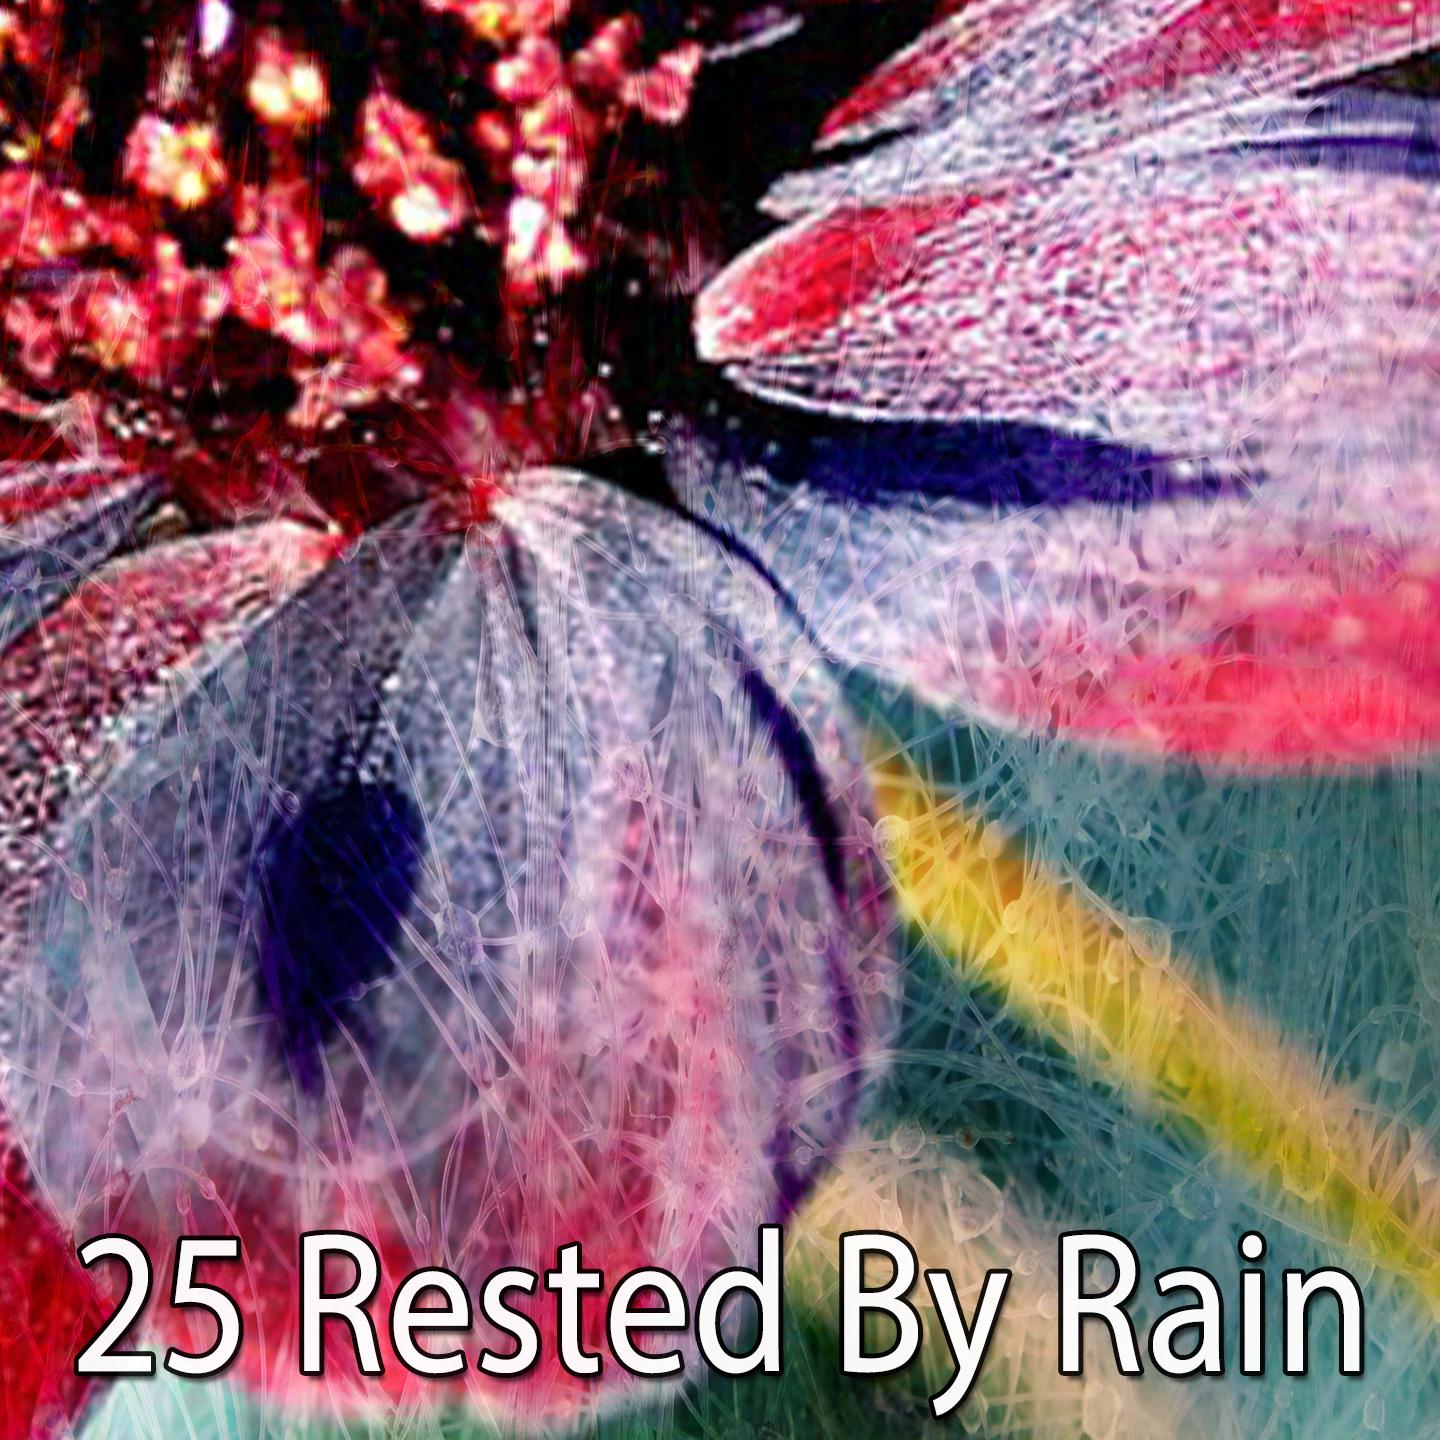 25 Rested by Rain